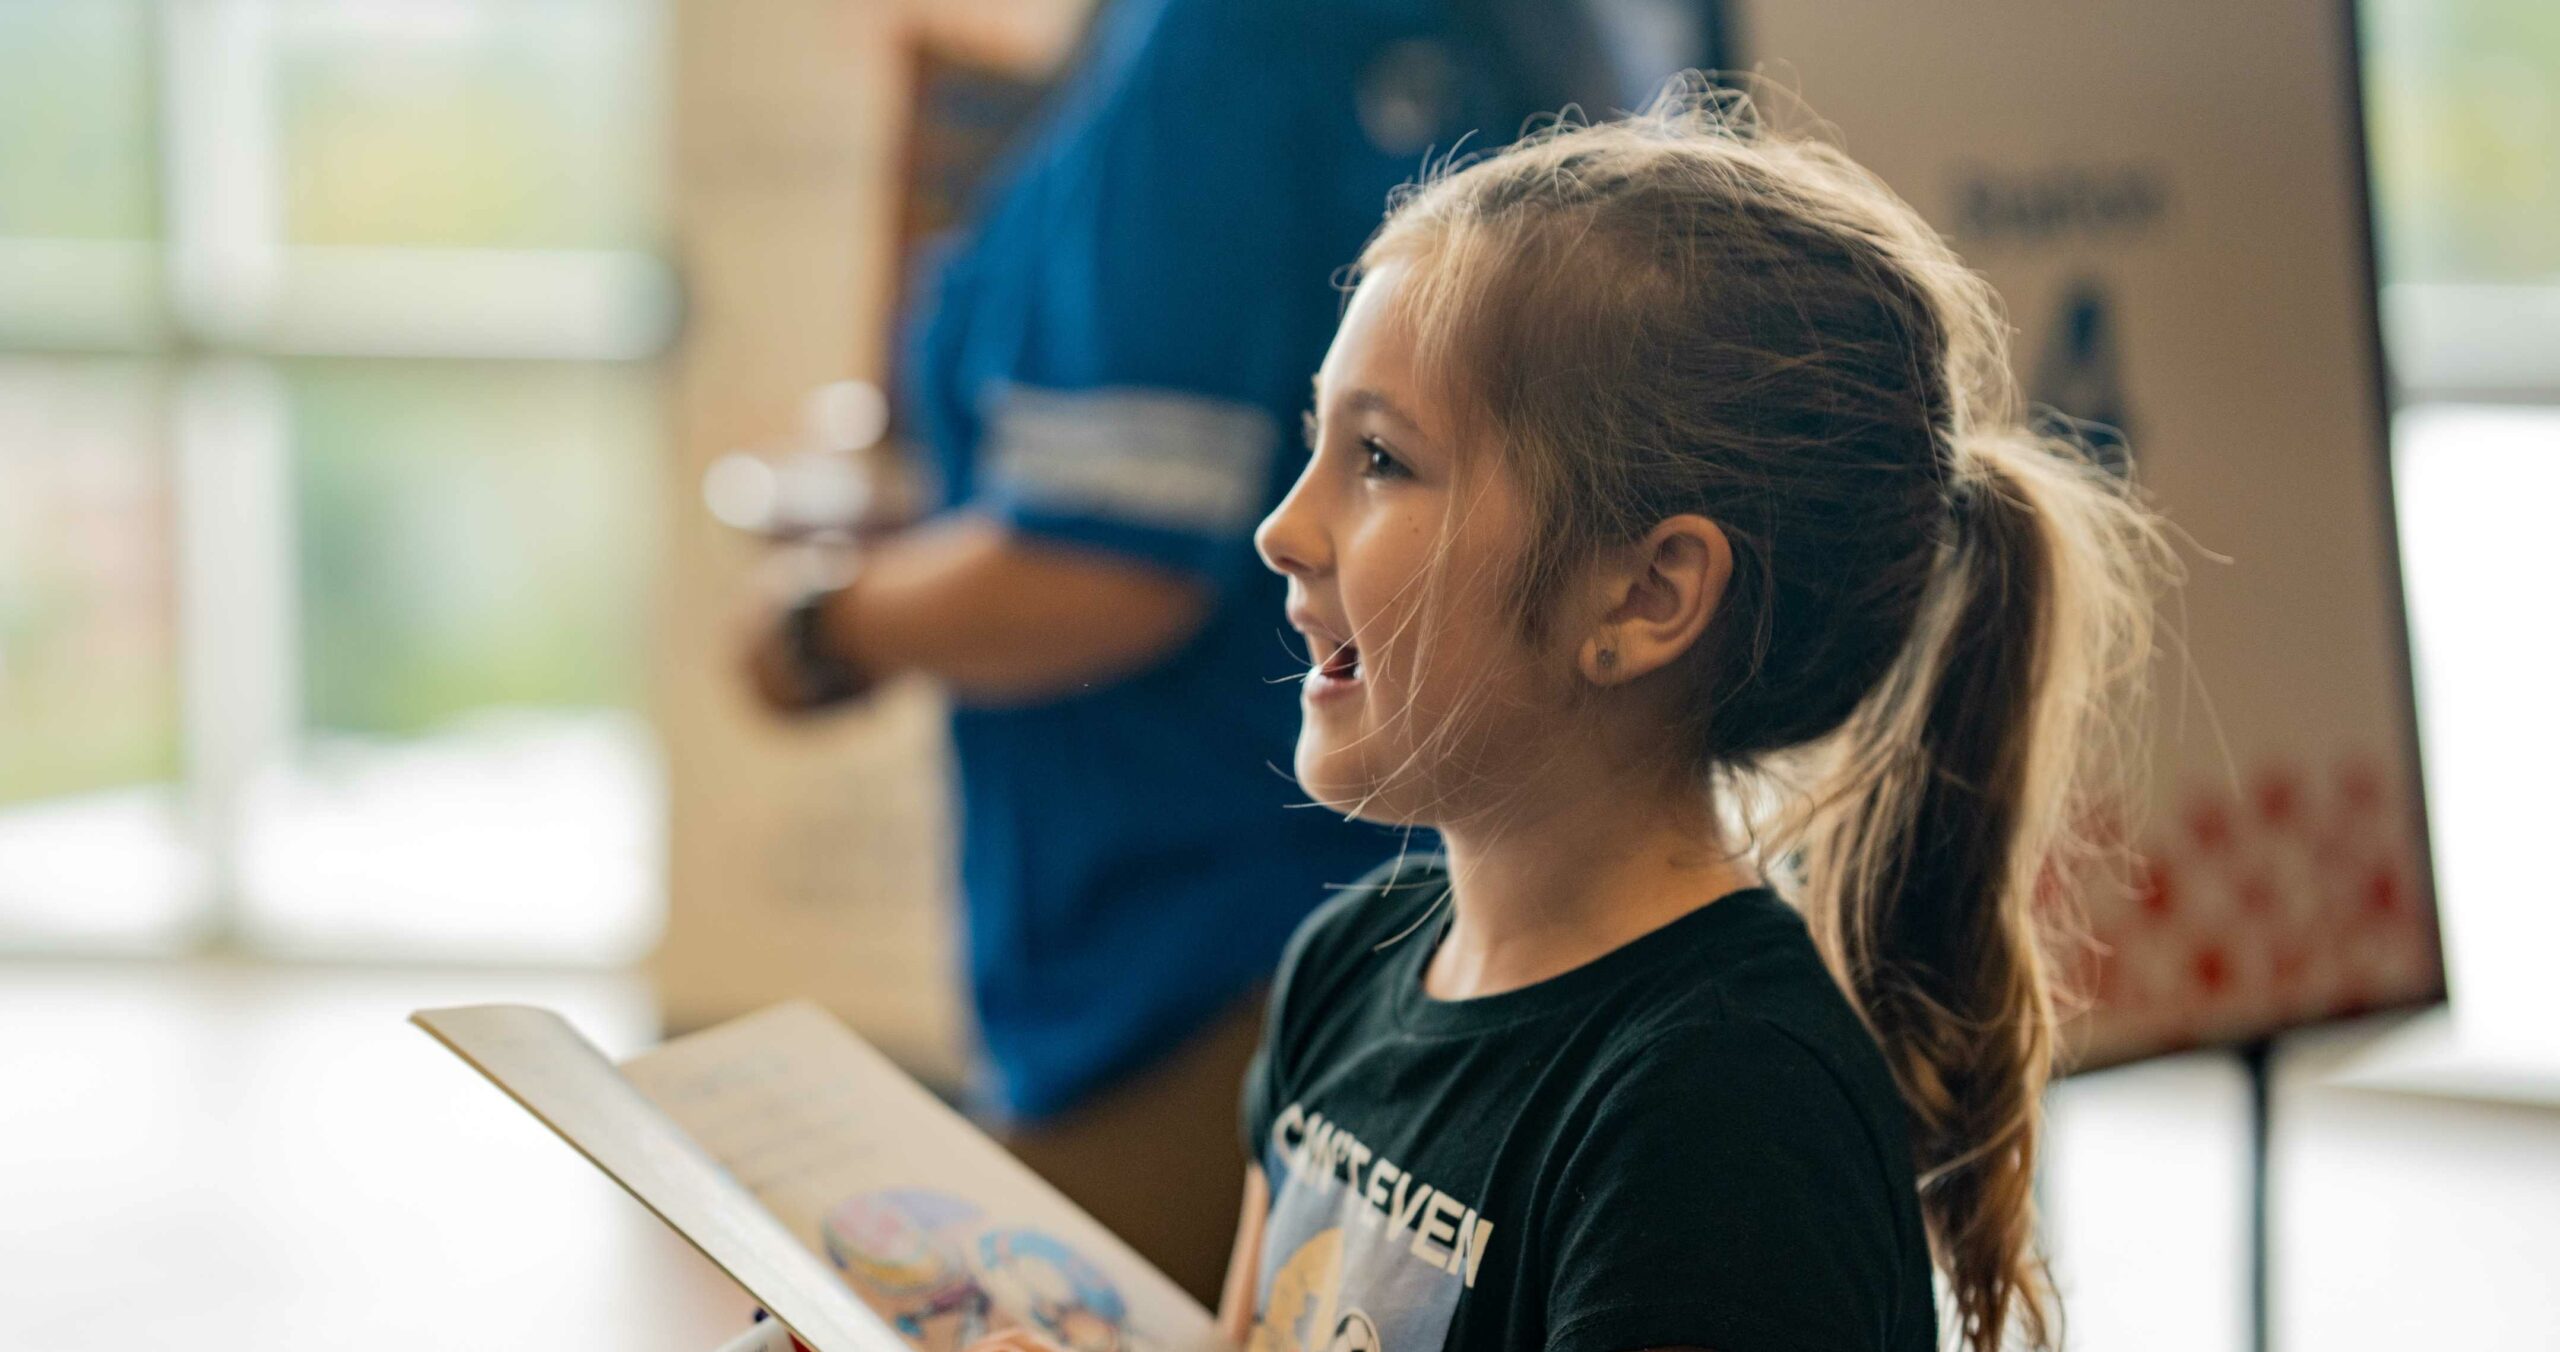 Free Florida Reading Program Launches Regional Partners Program to Reach More VPK – 5th Grade Families in Need of Literacy Support